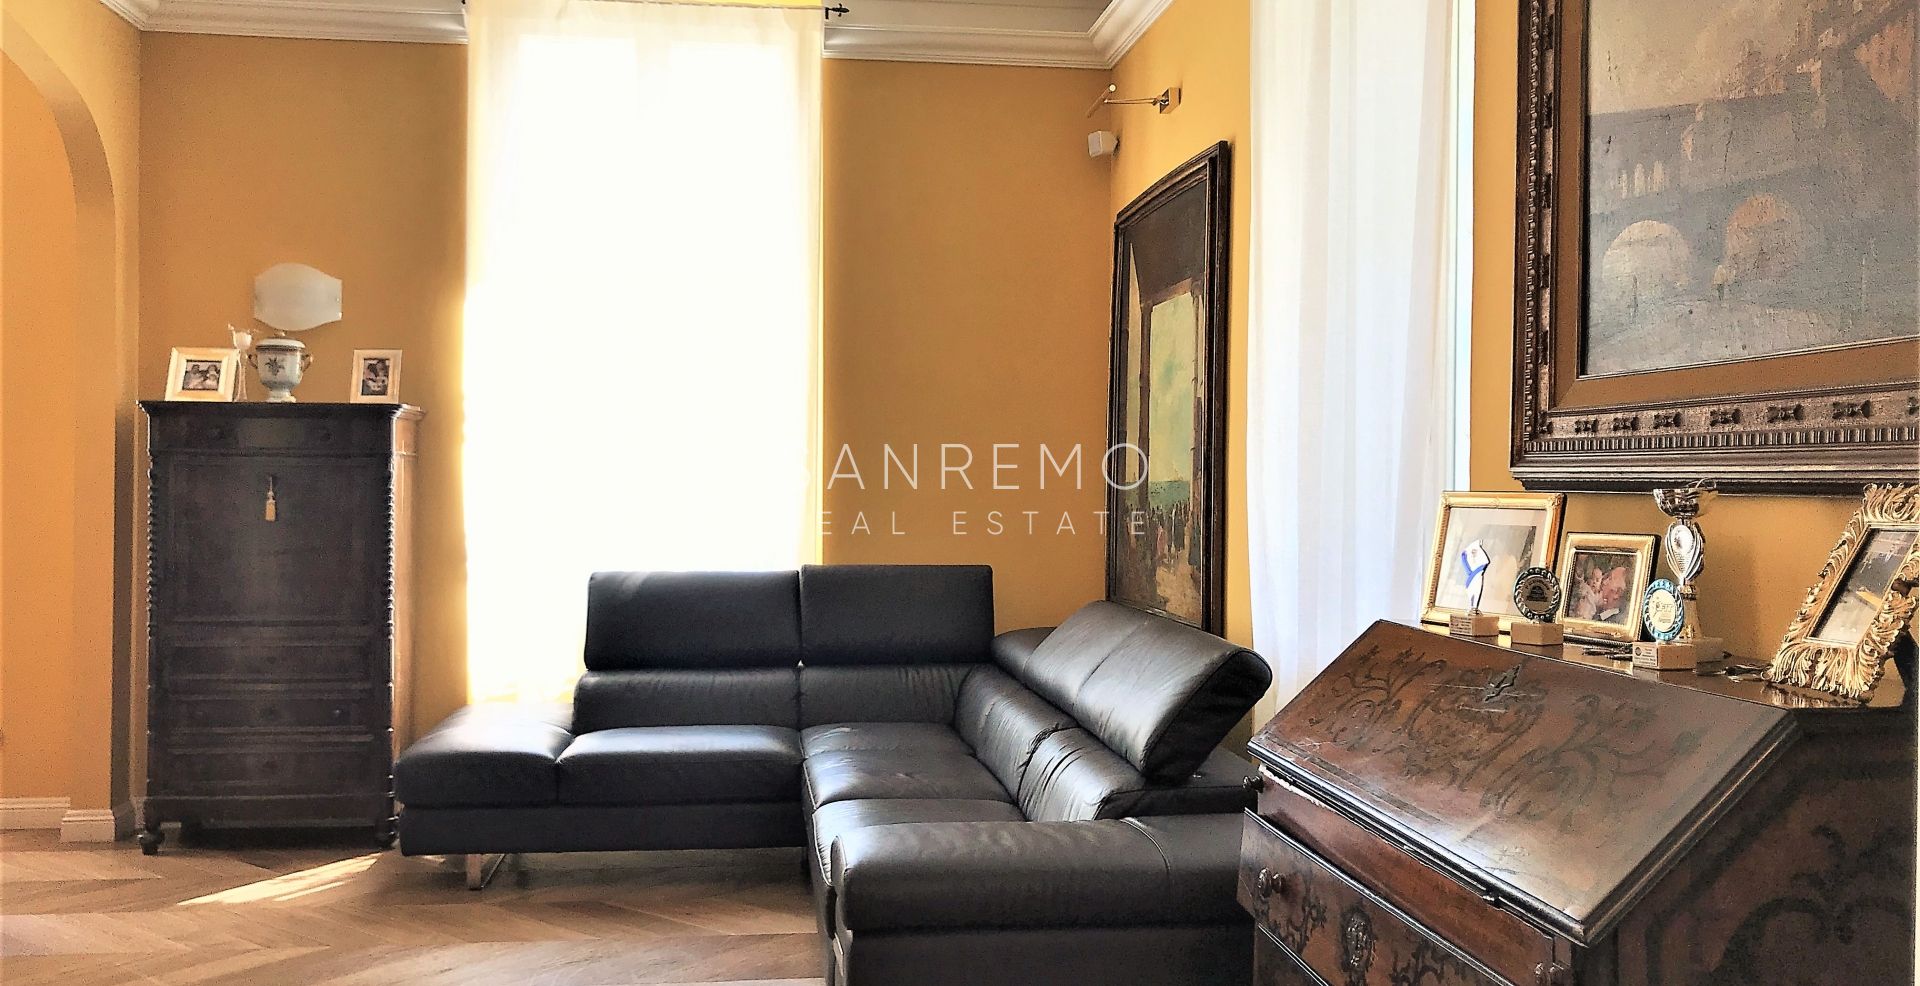 Liberty Style property for sale in Sanremo